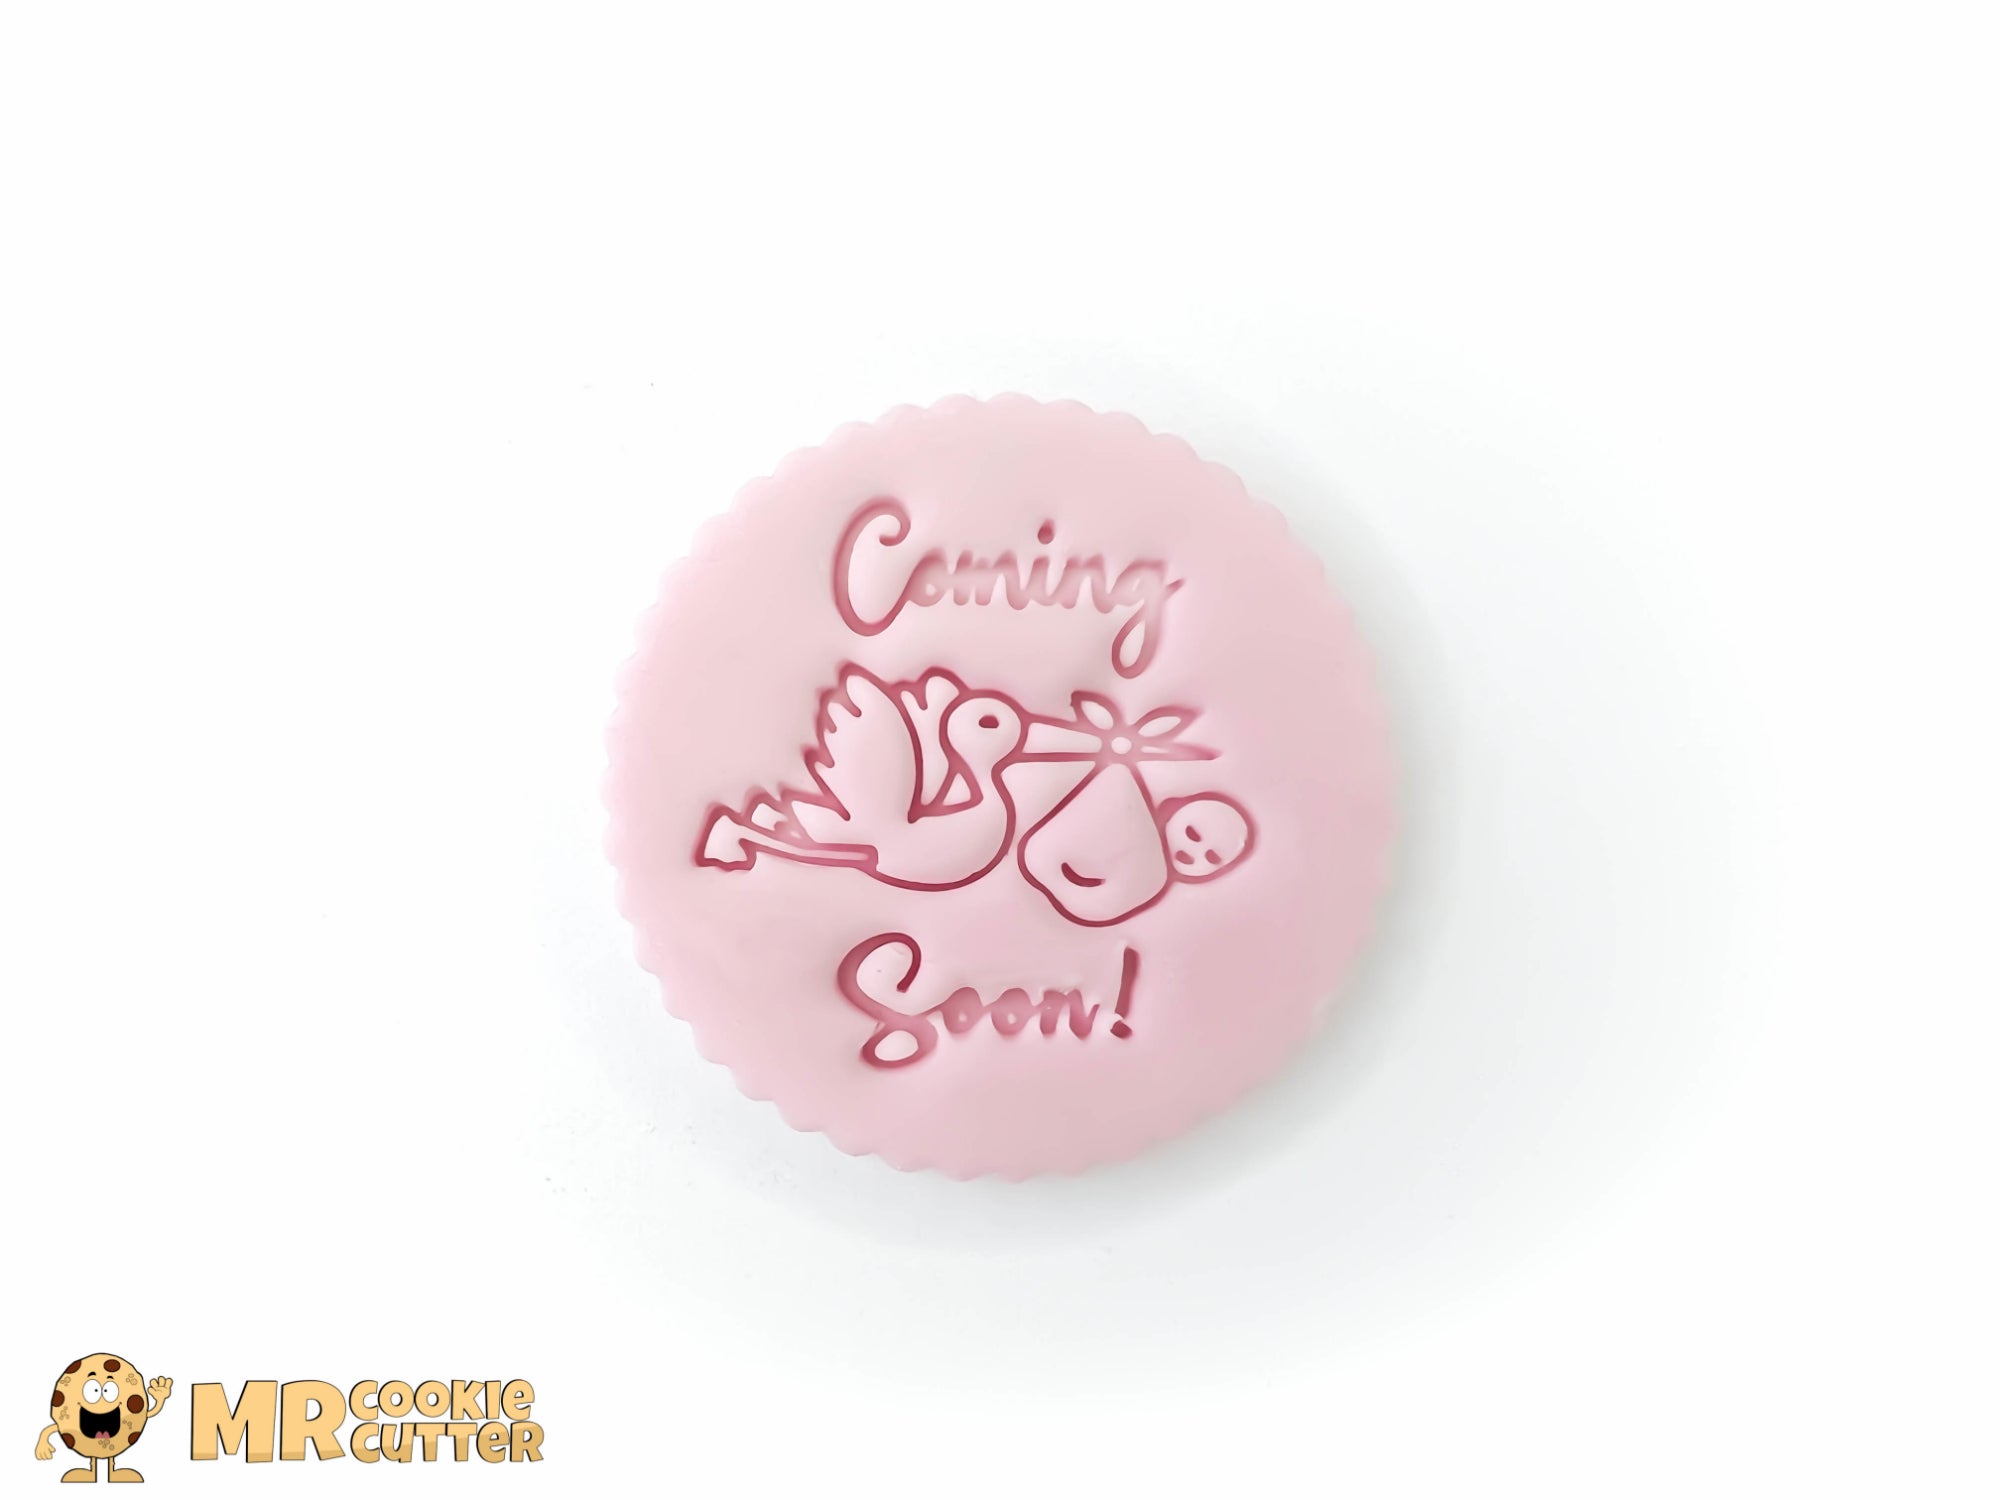 Coming Soon Baby Cupcake Topper with a baby and a crane